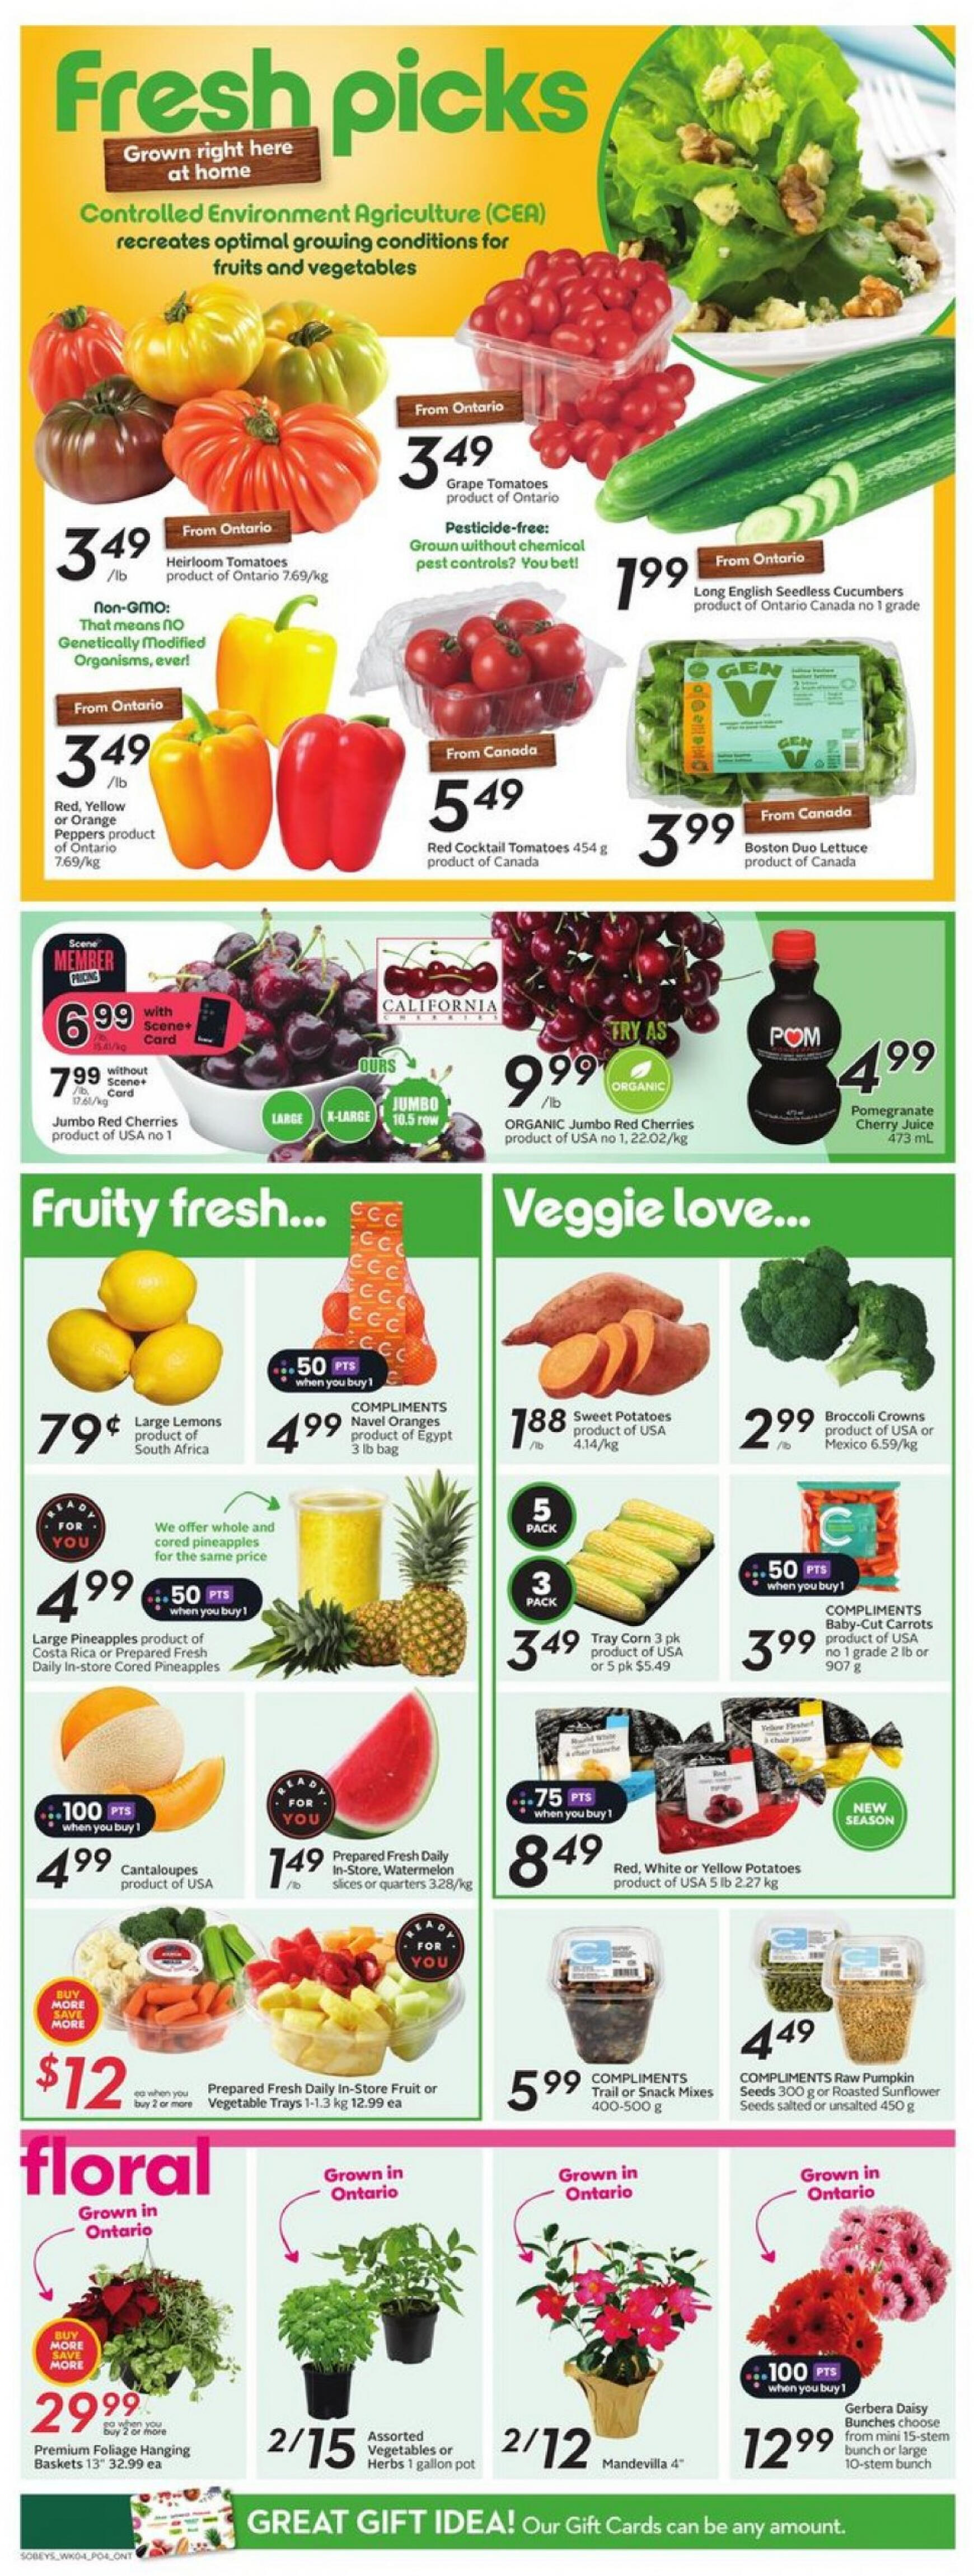 sobeys - Sobeys - Weekly Flyer - Ontario flyer current 23.05. - 29.05. - page: 9